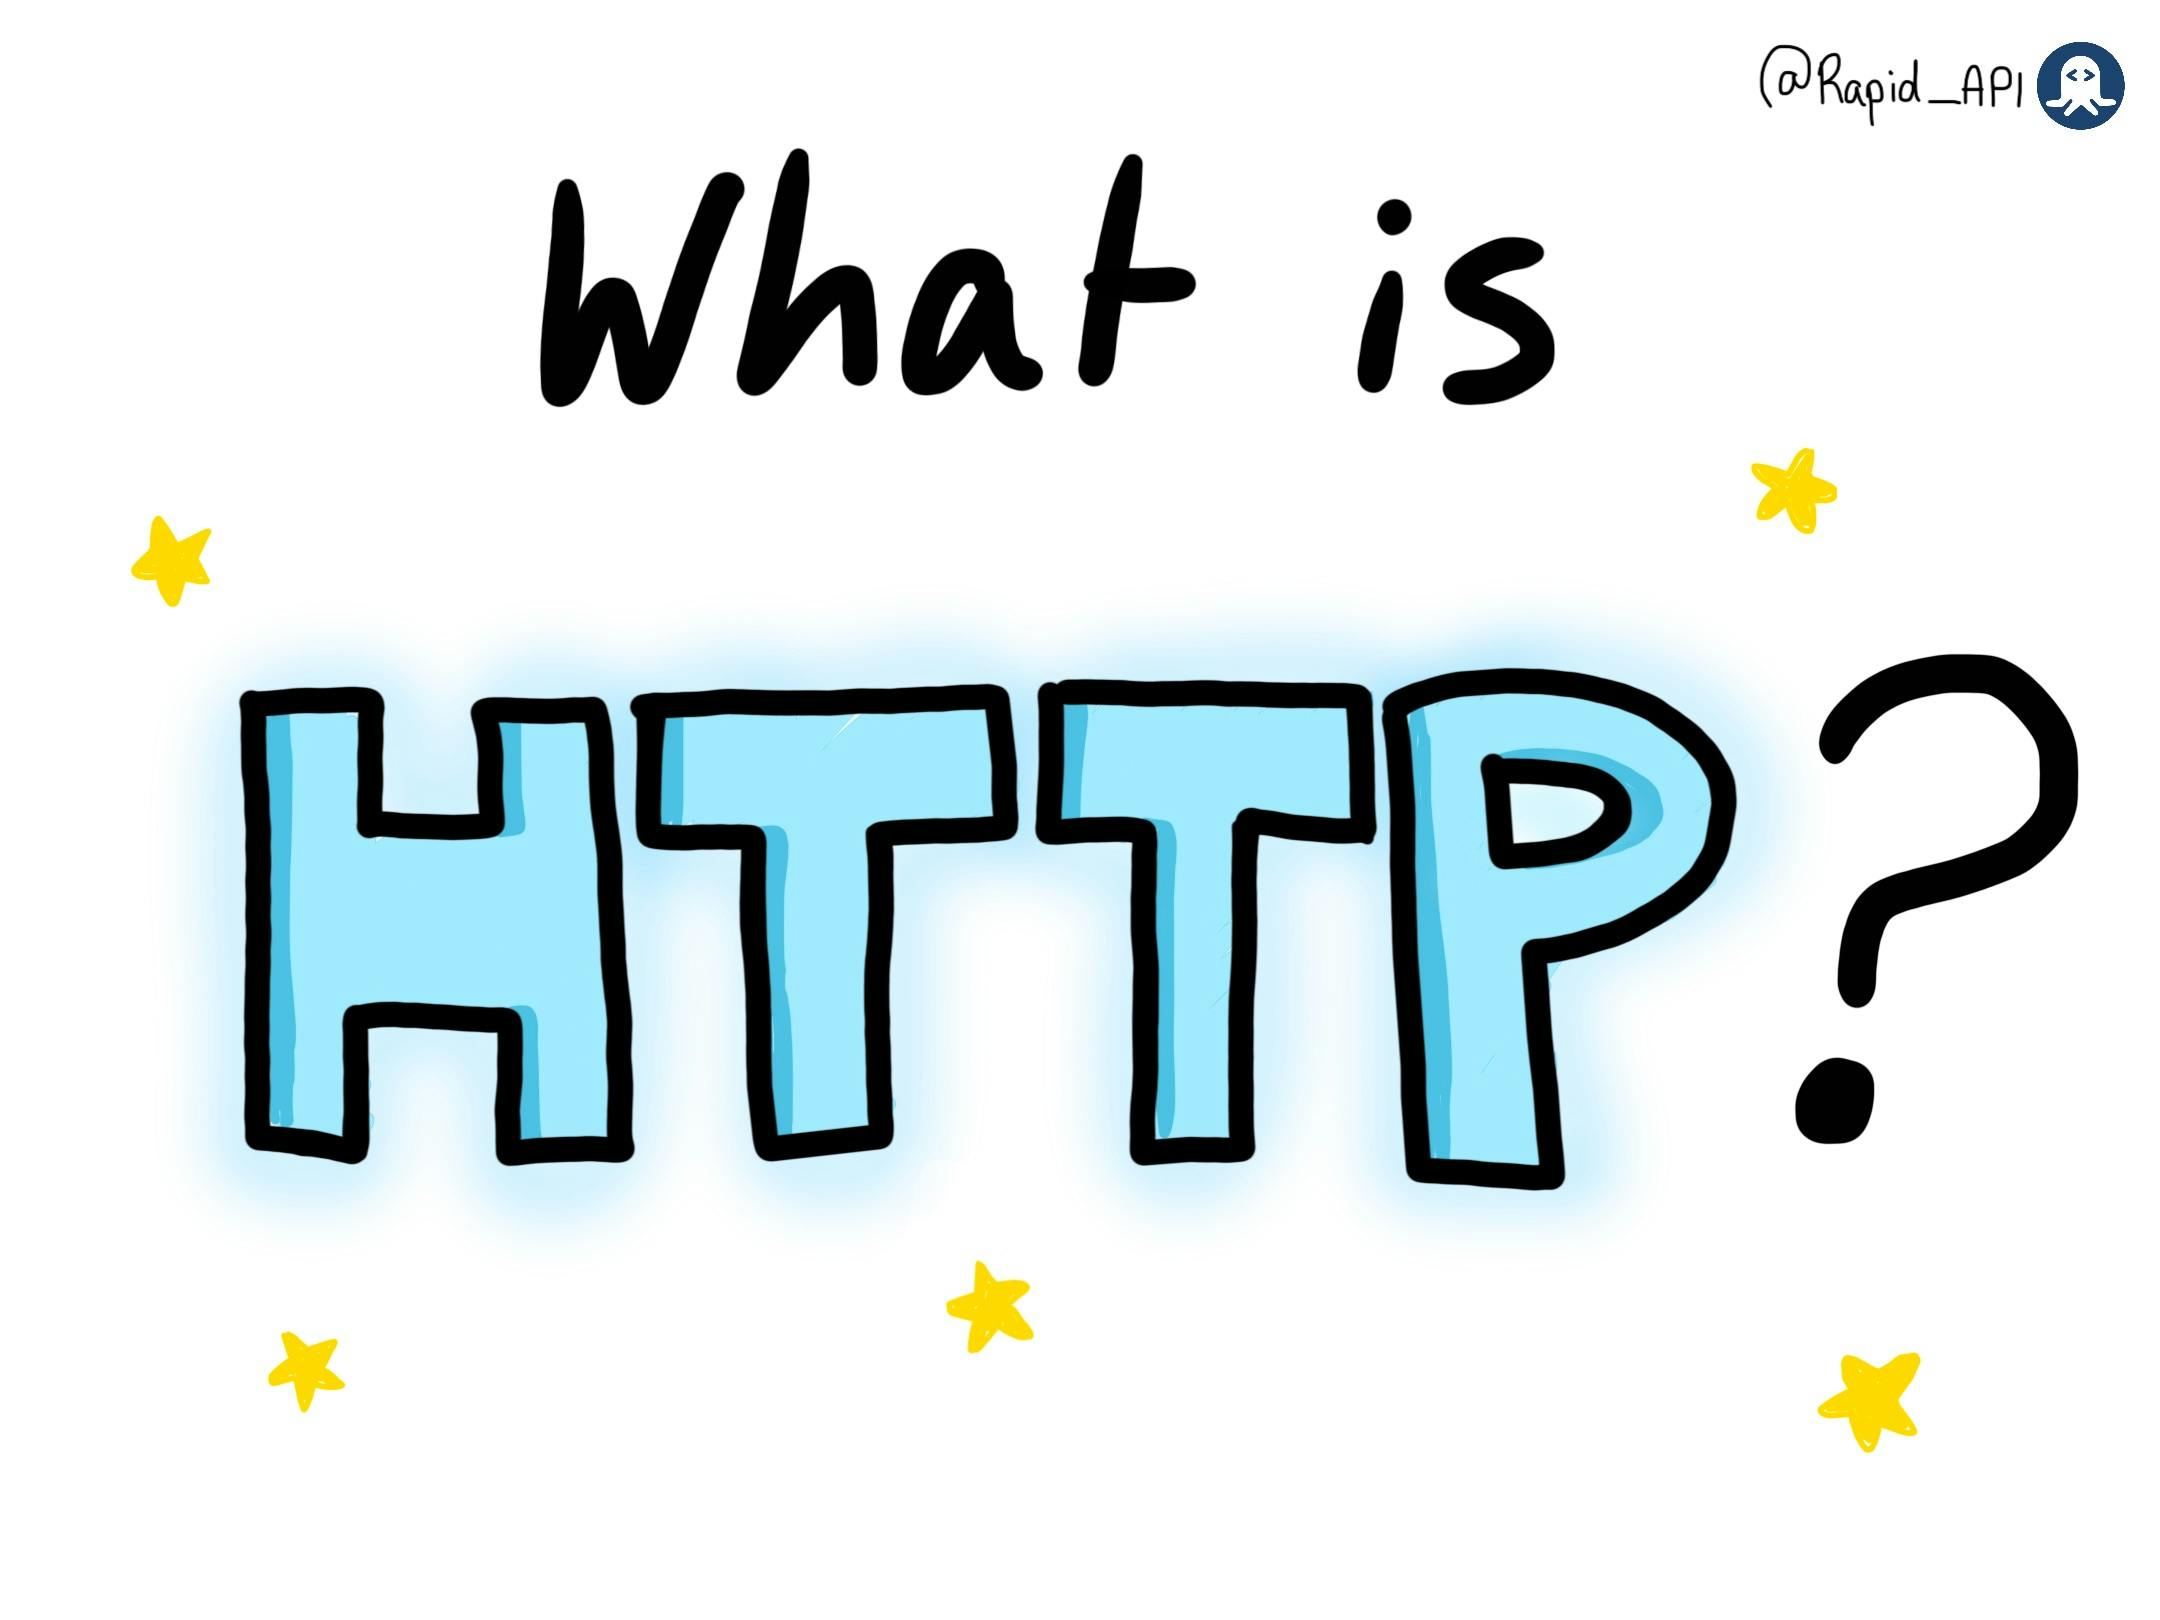 What is HTTP?